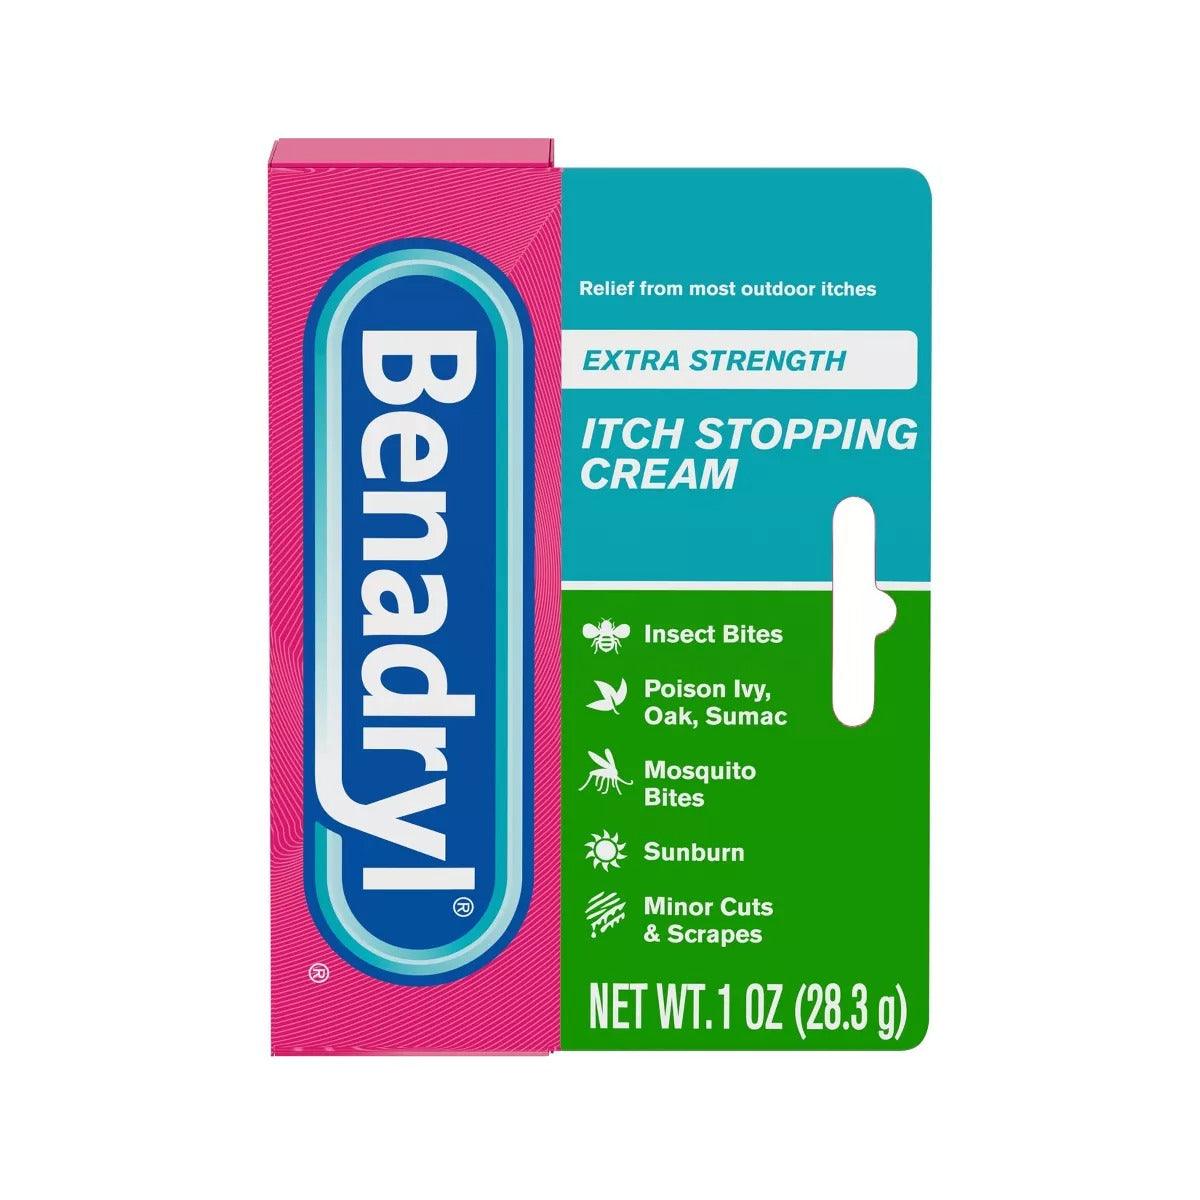 Benadryl Extra Strength Itch Stopping Cream for Itchy Skin and Rash Relief - 1 oz